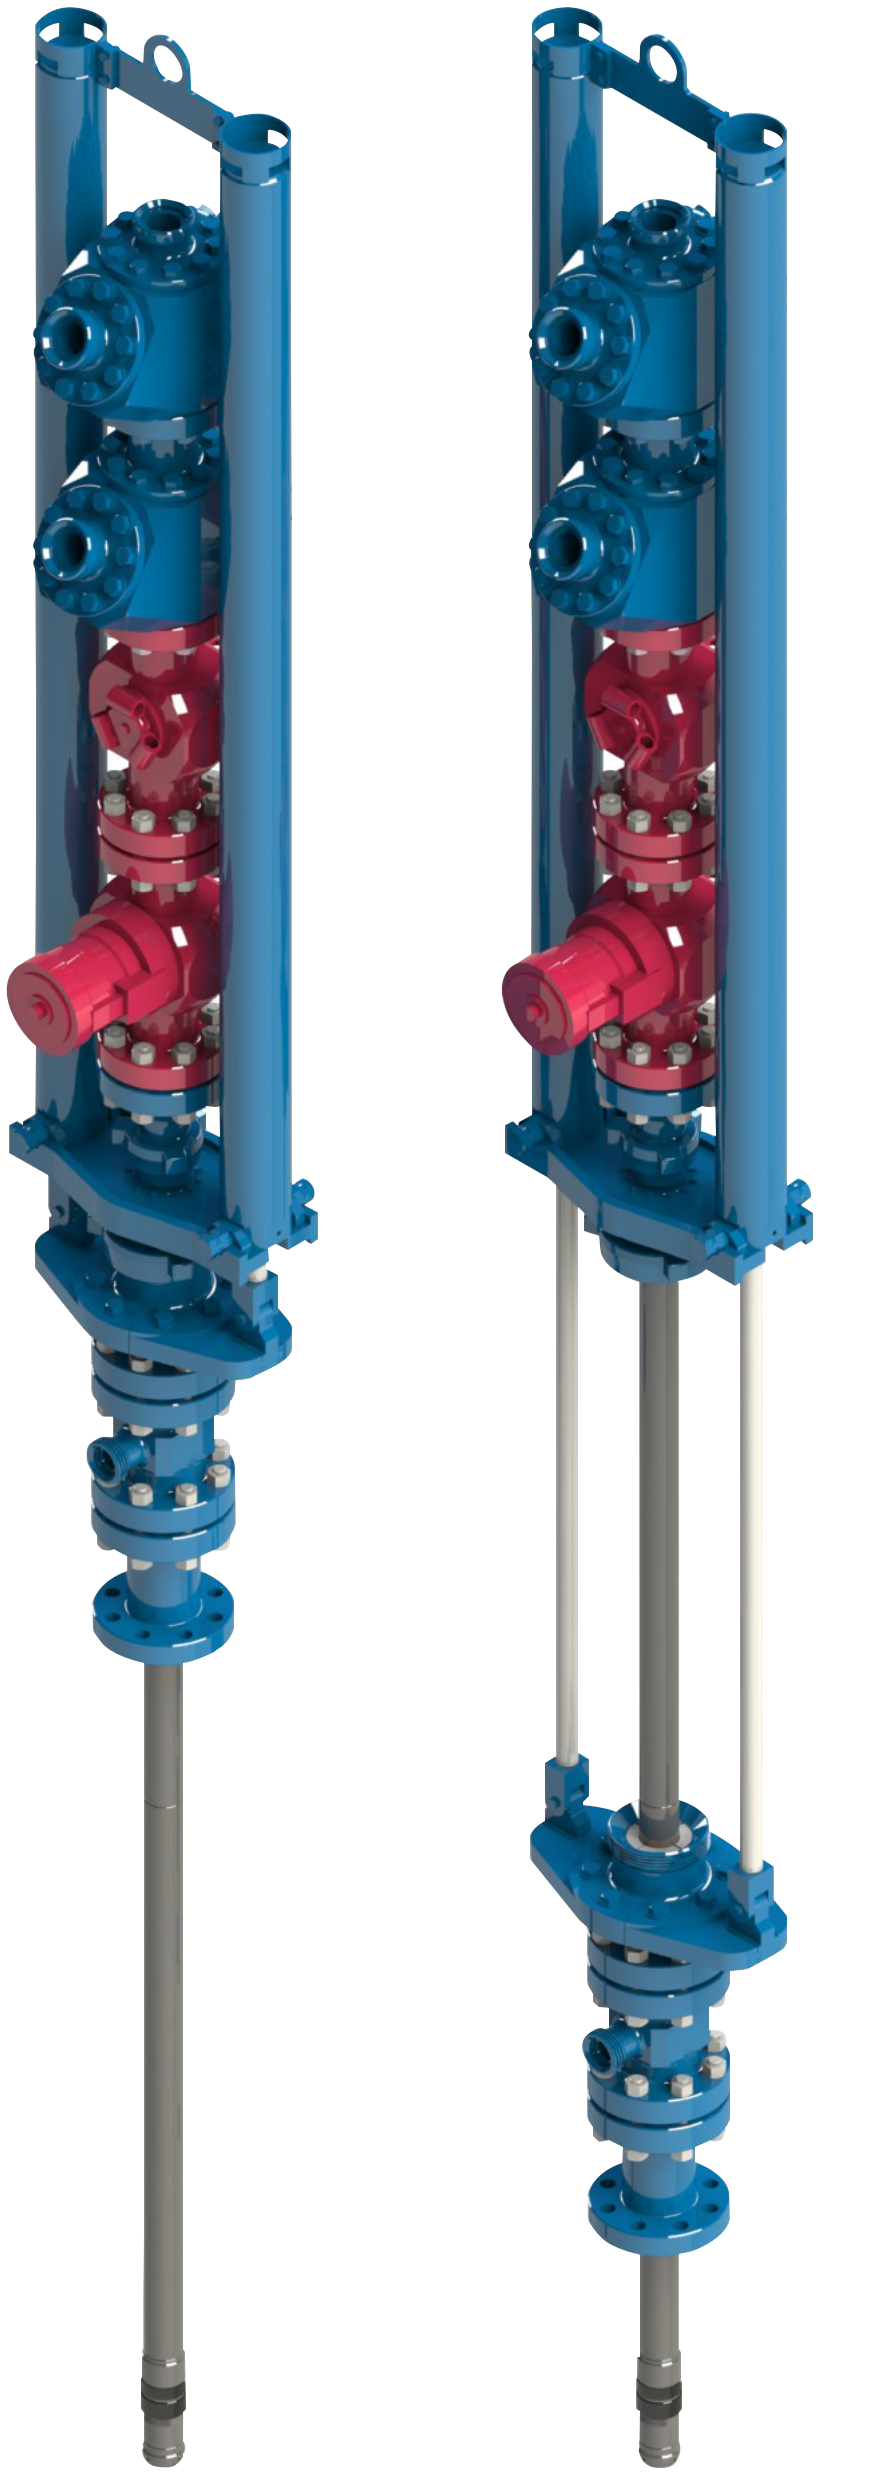 Wellhead Isolation Tool for Oil and Gas Industry